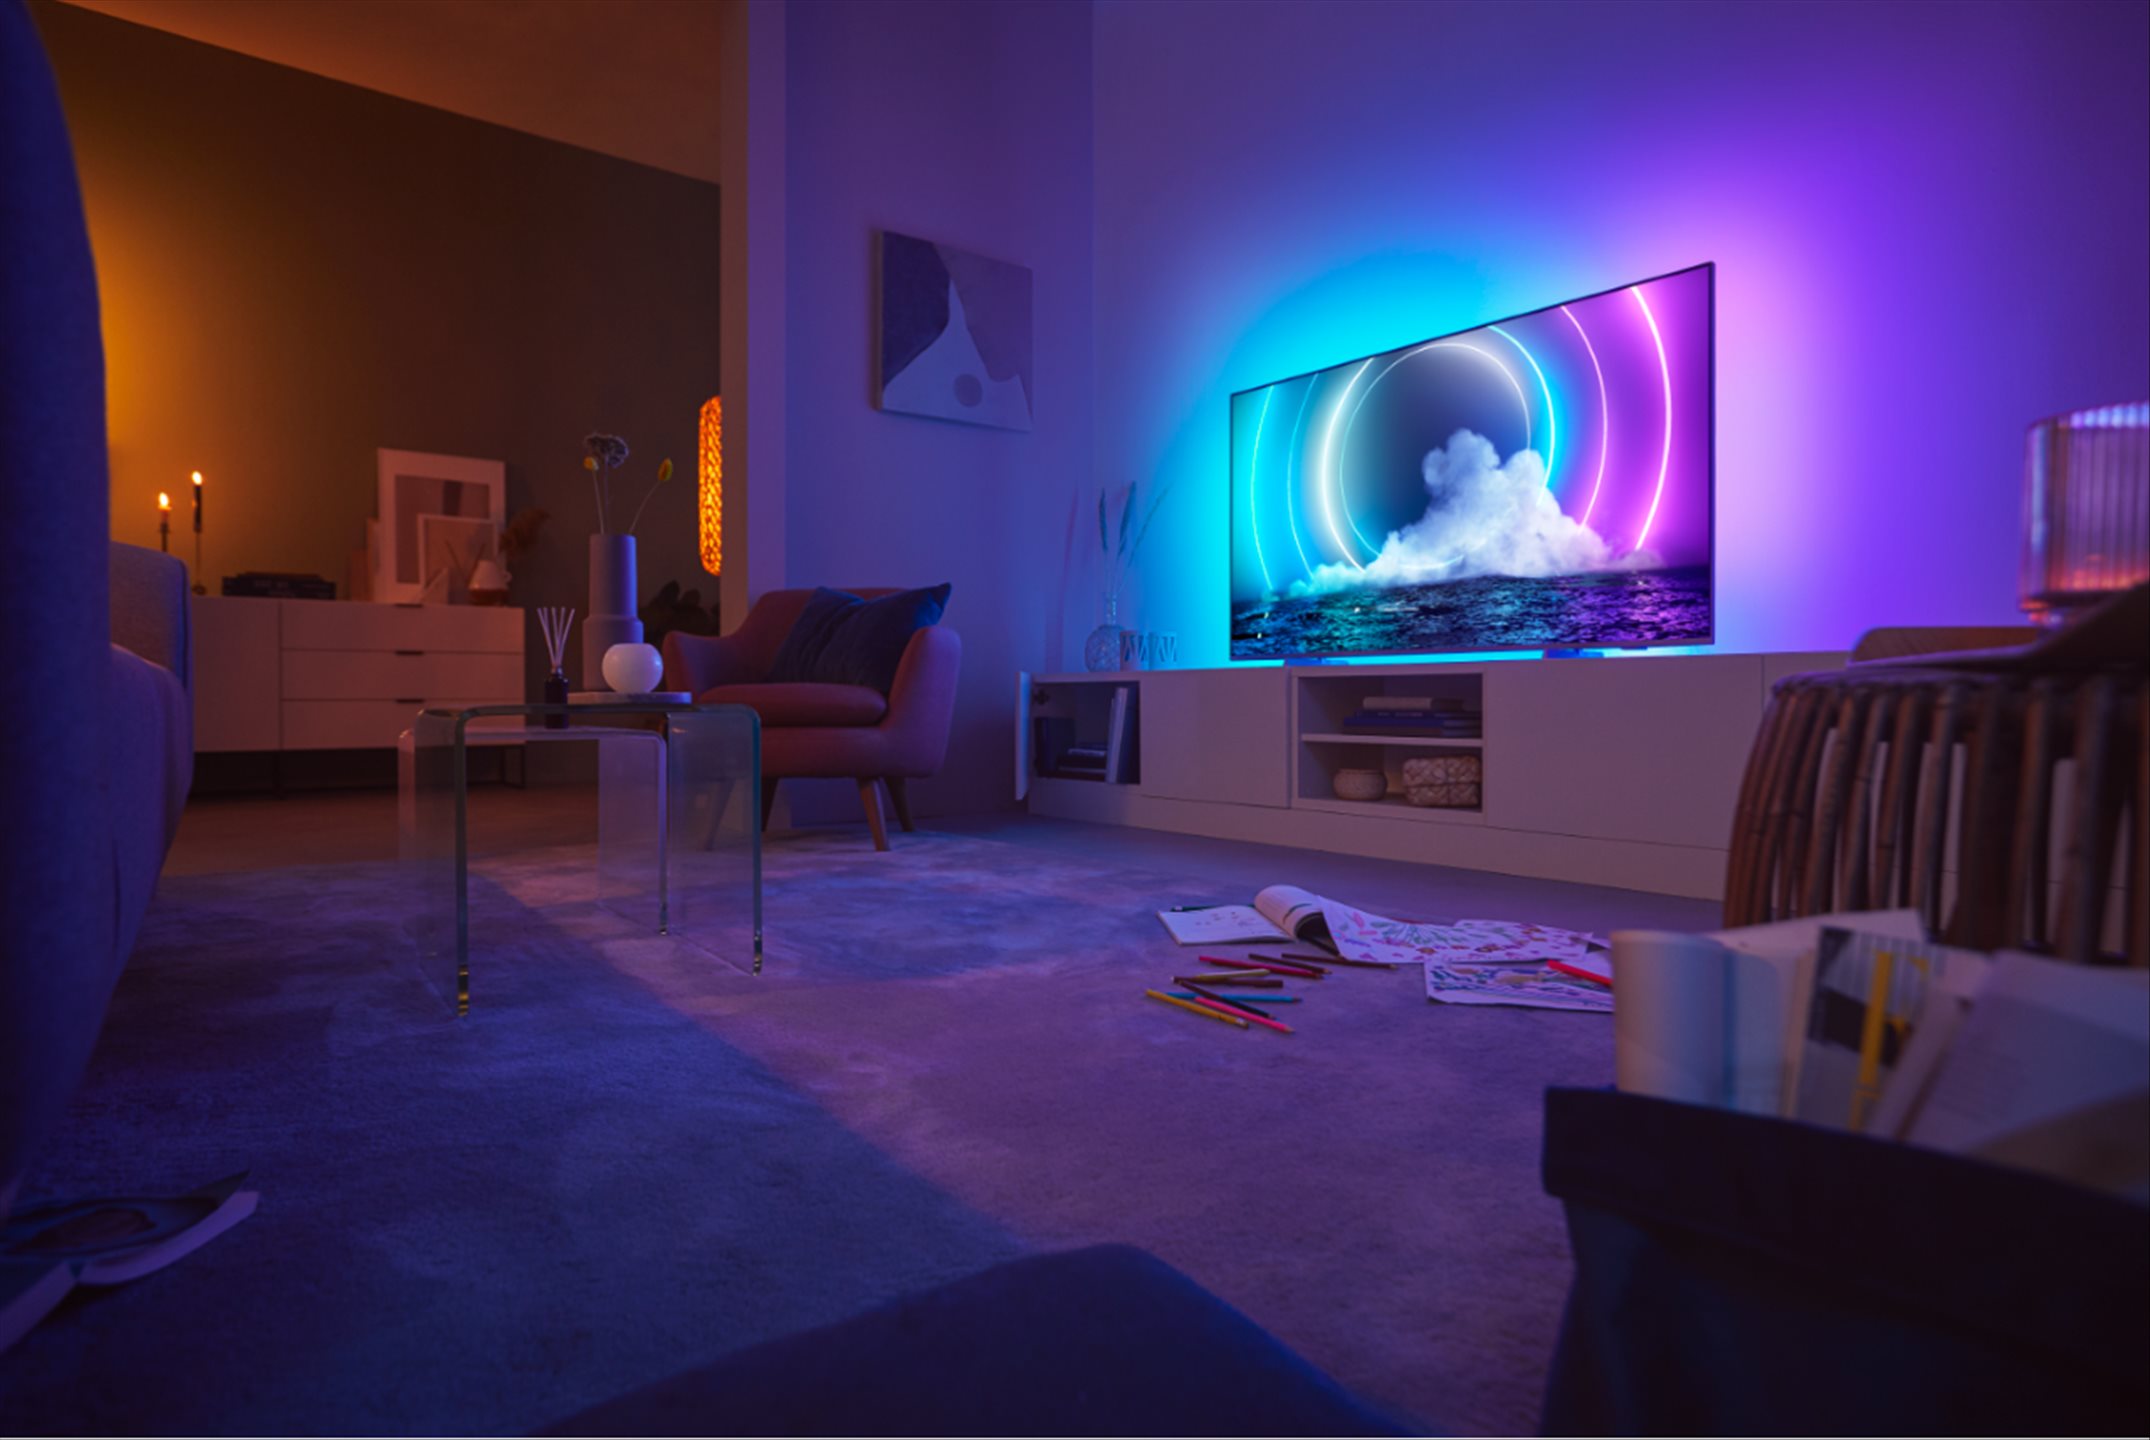 This TV from Philips comes with immersive, built-in backlighting